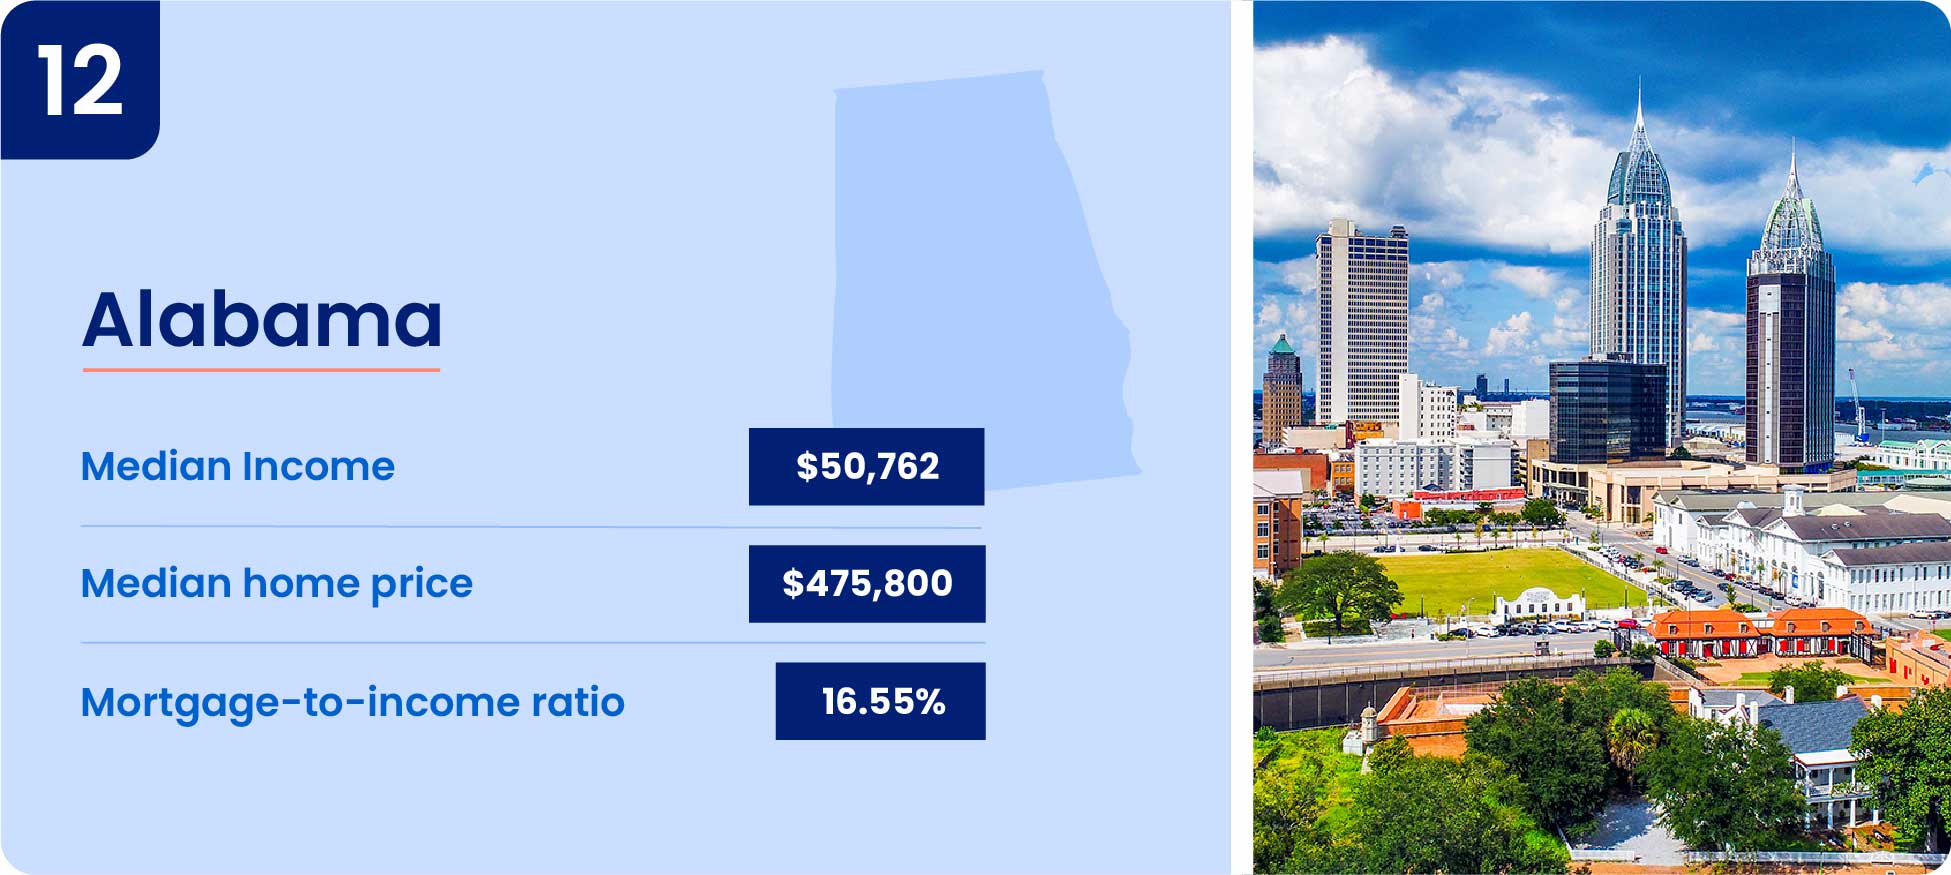 Image shows why one of the cheapest states to buy a house is Alabama.